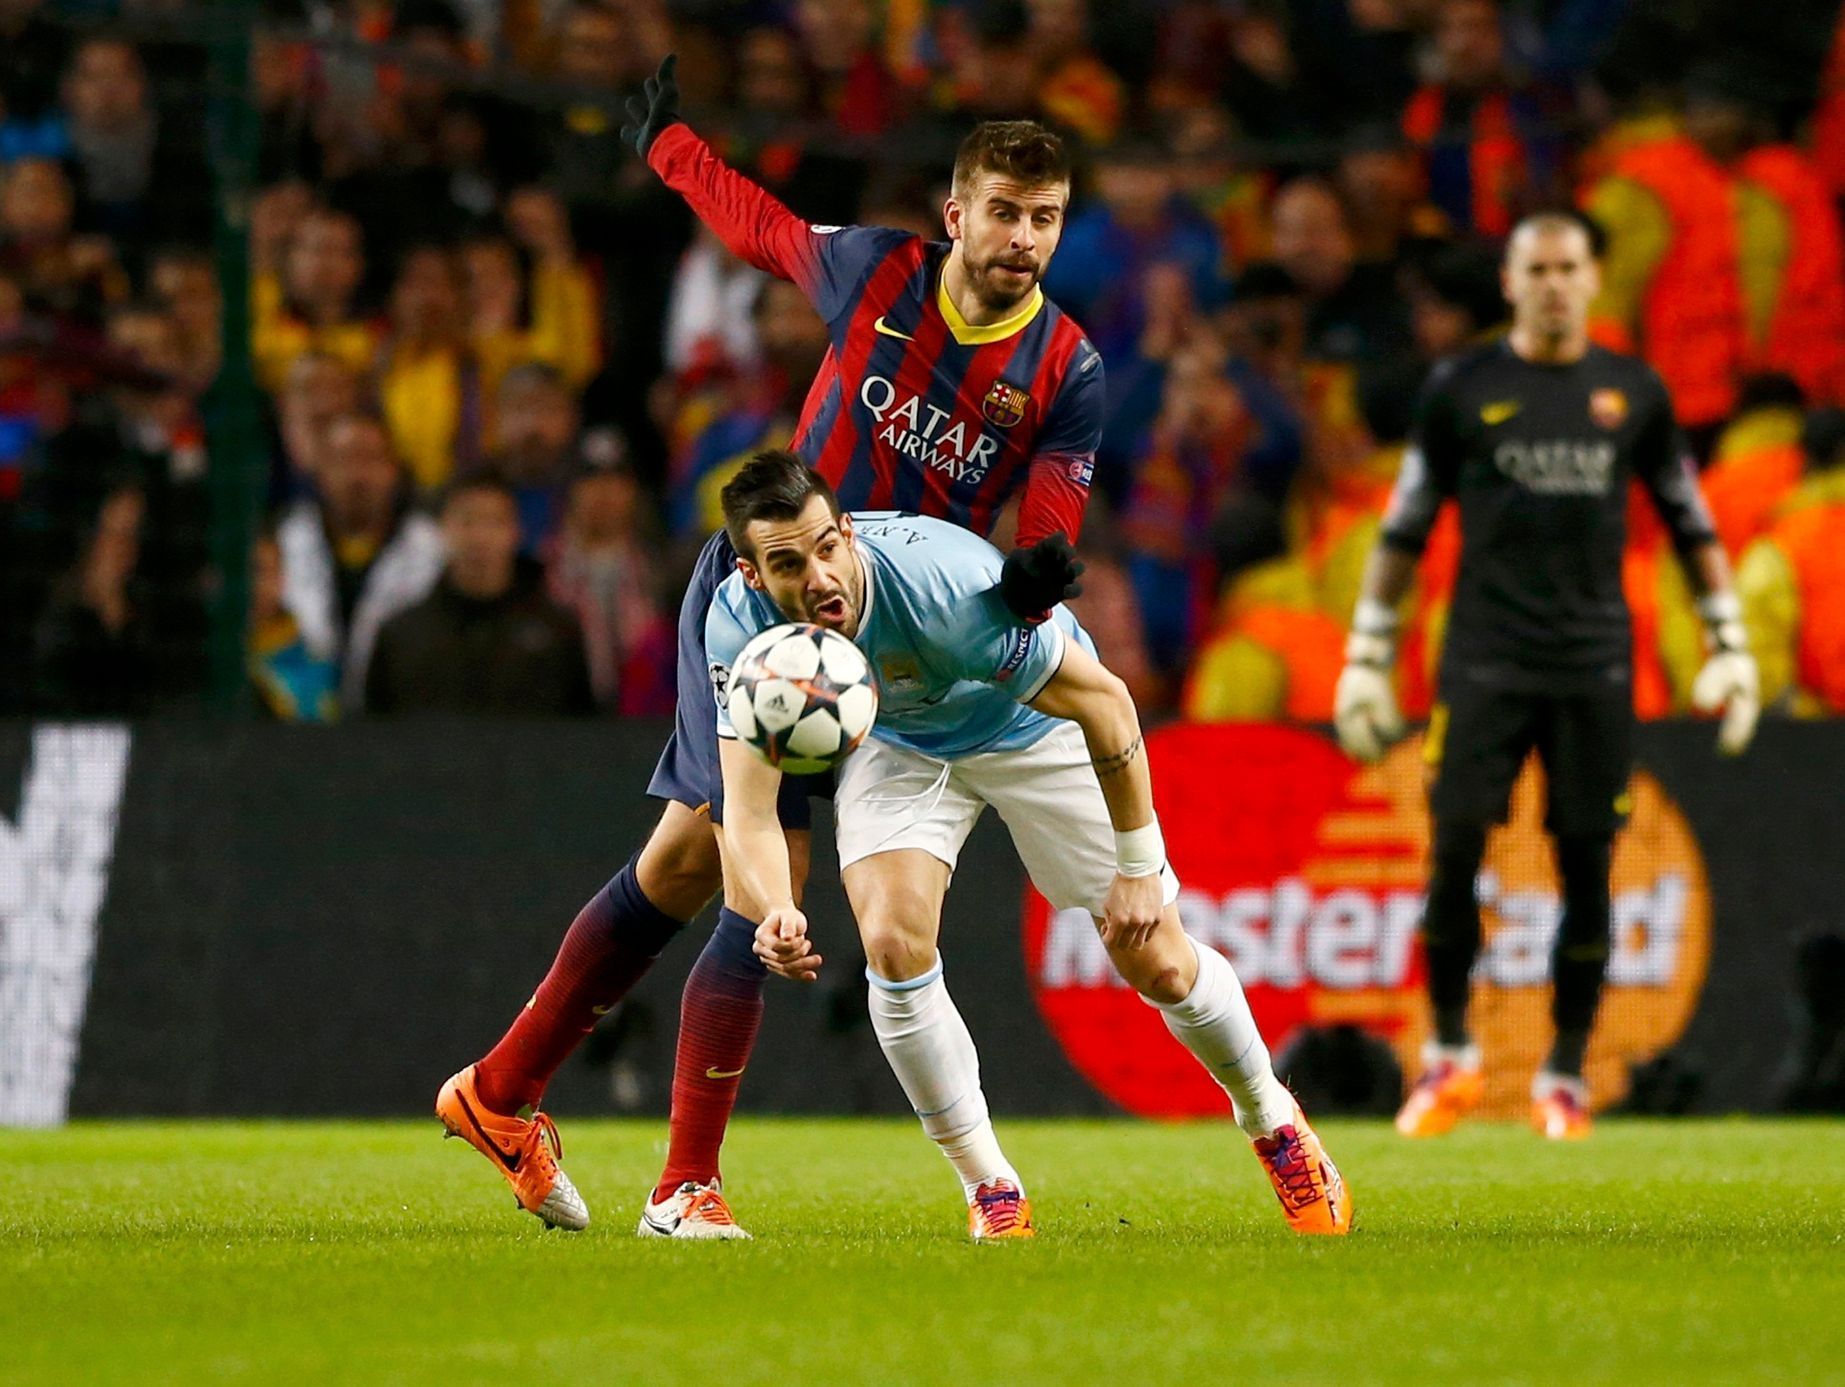 Manchester City's Alvaro Negredo is challenged by Barcelona's Gerard Pique during their Champions League round of 16 first leg soccer match at the Etihad Stadium in Manchester